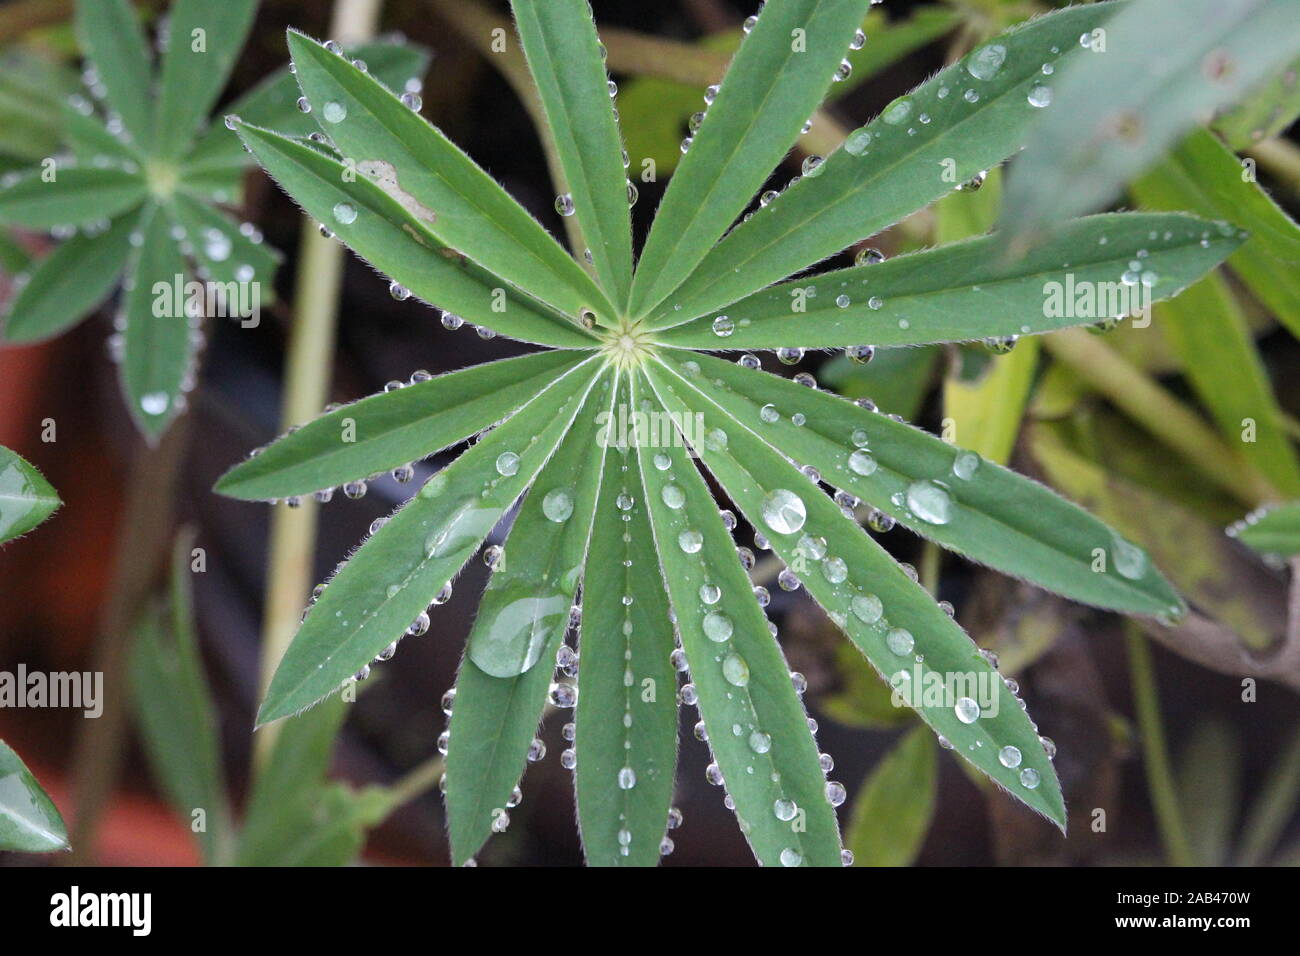 A close up photograph of water droplets sat on the delicate leaves of a lupin plant. Stock Photo